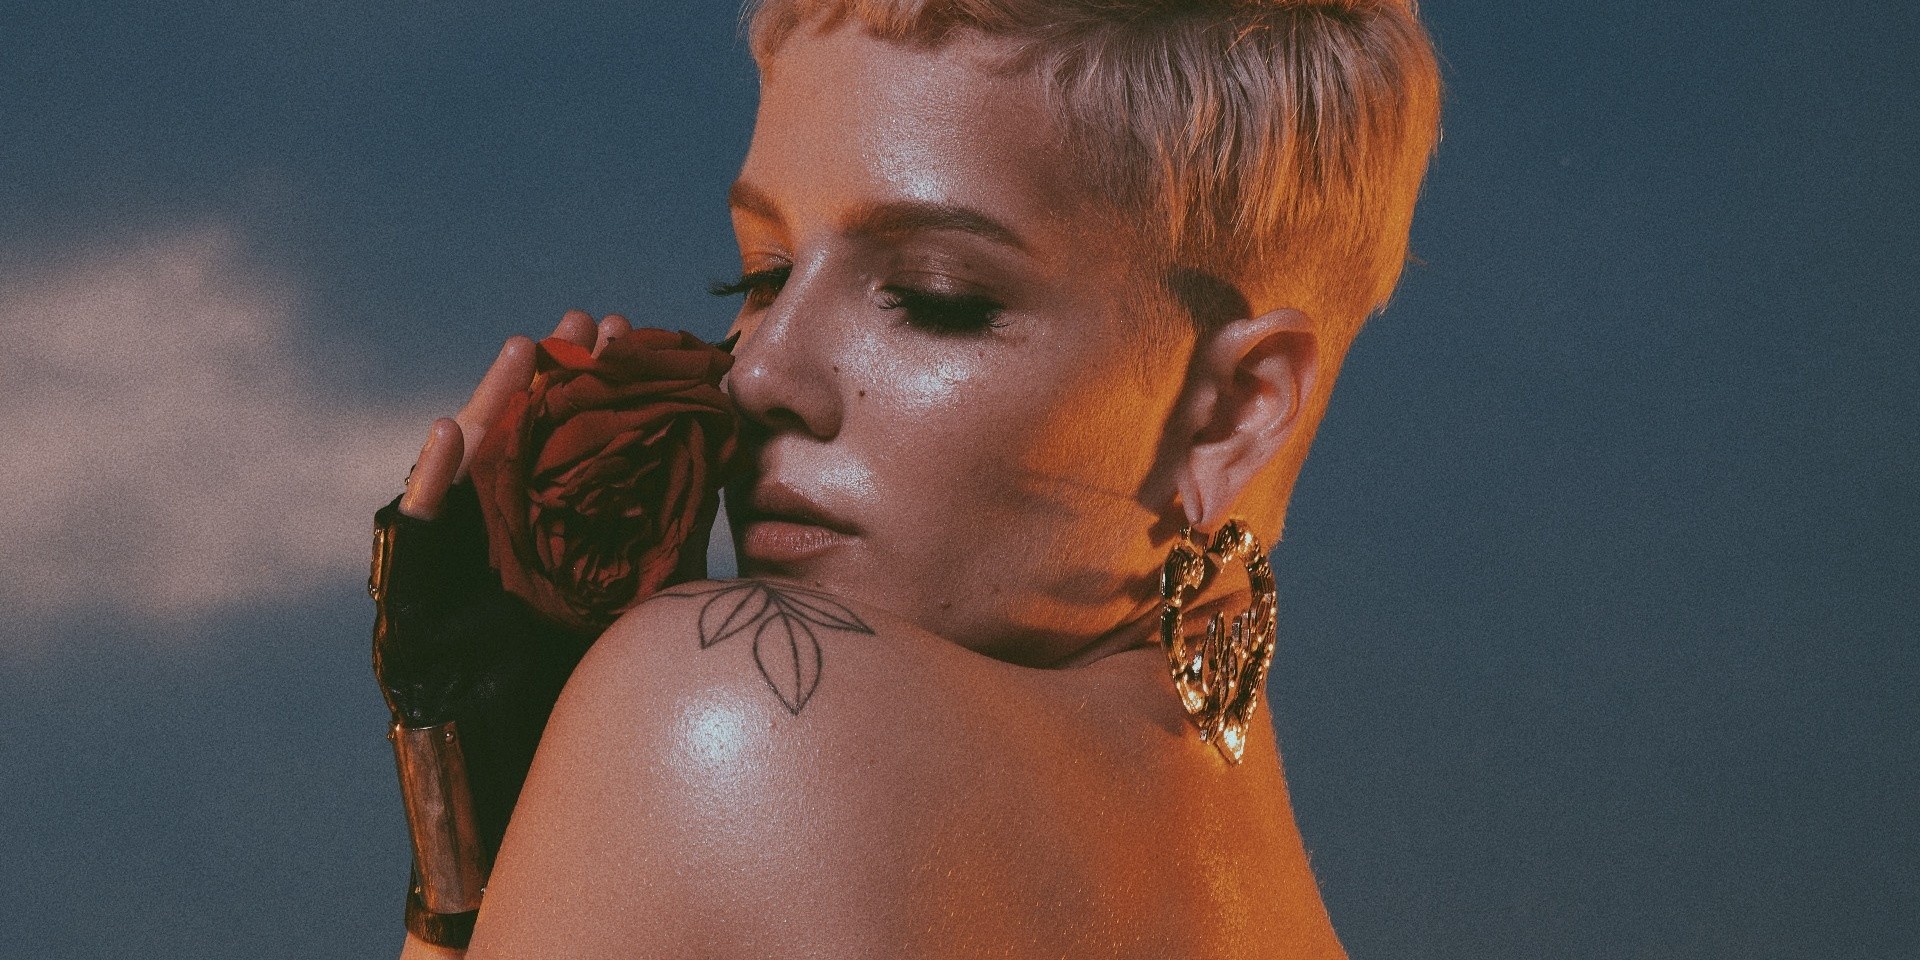 Halsey's world tour will land in Singapore, the Philippines and Indonesia